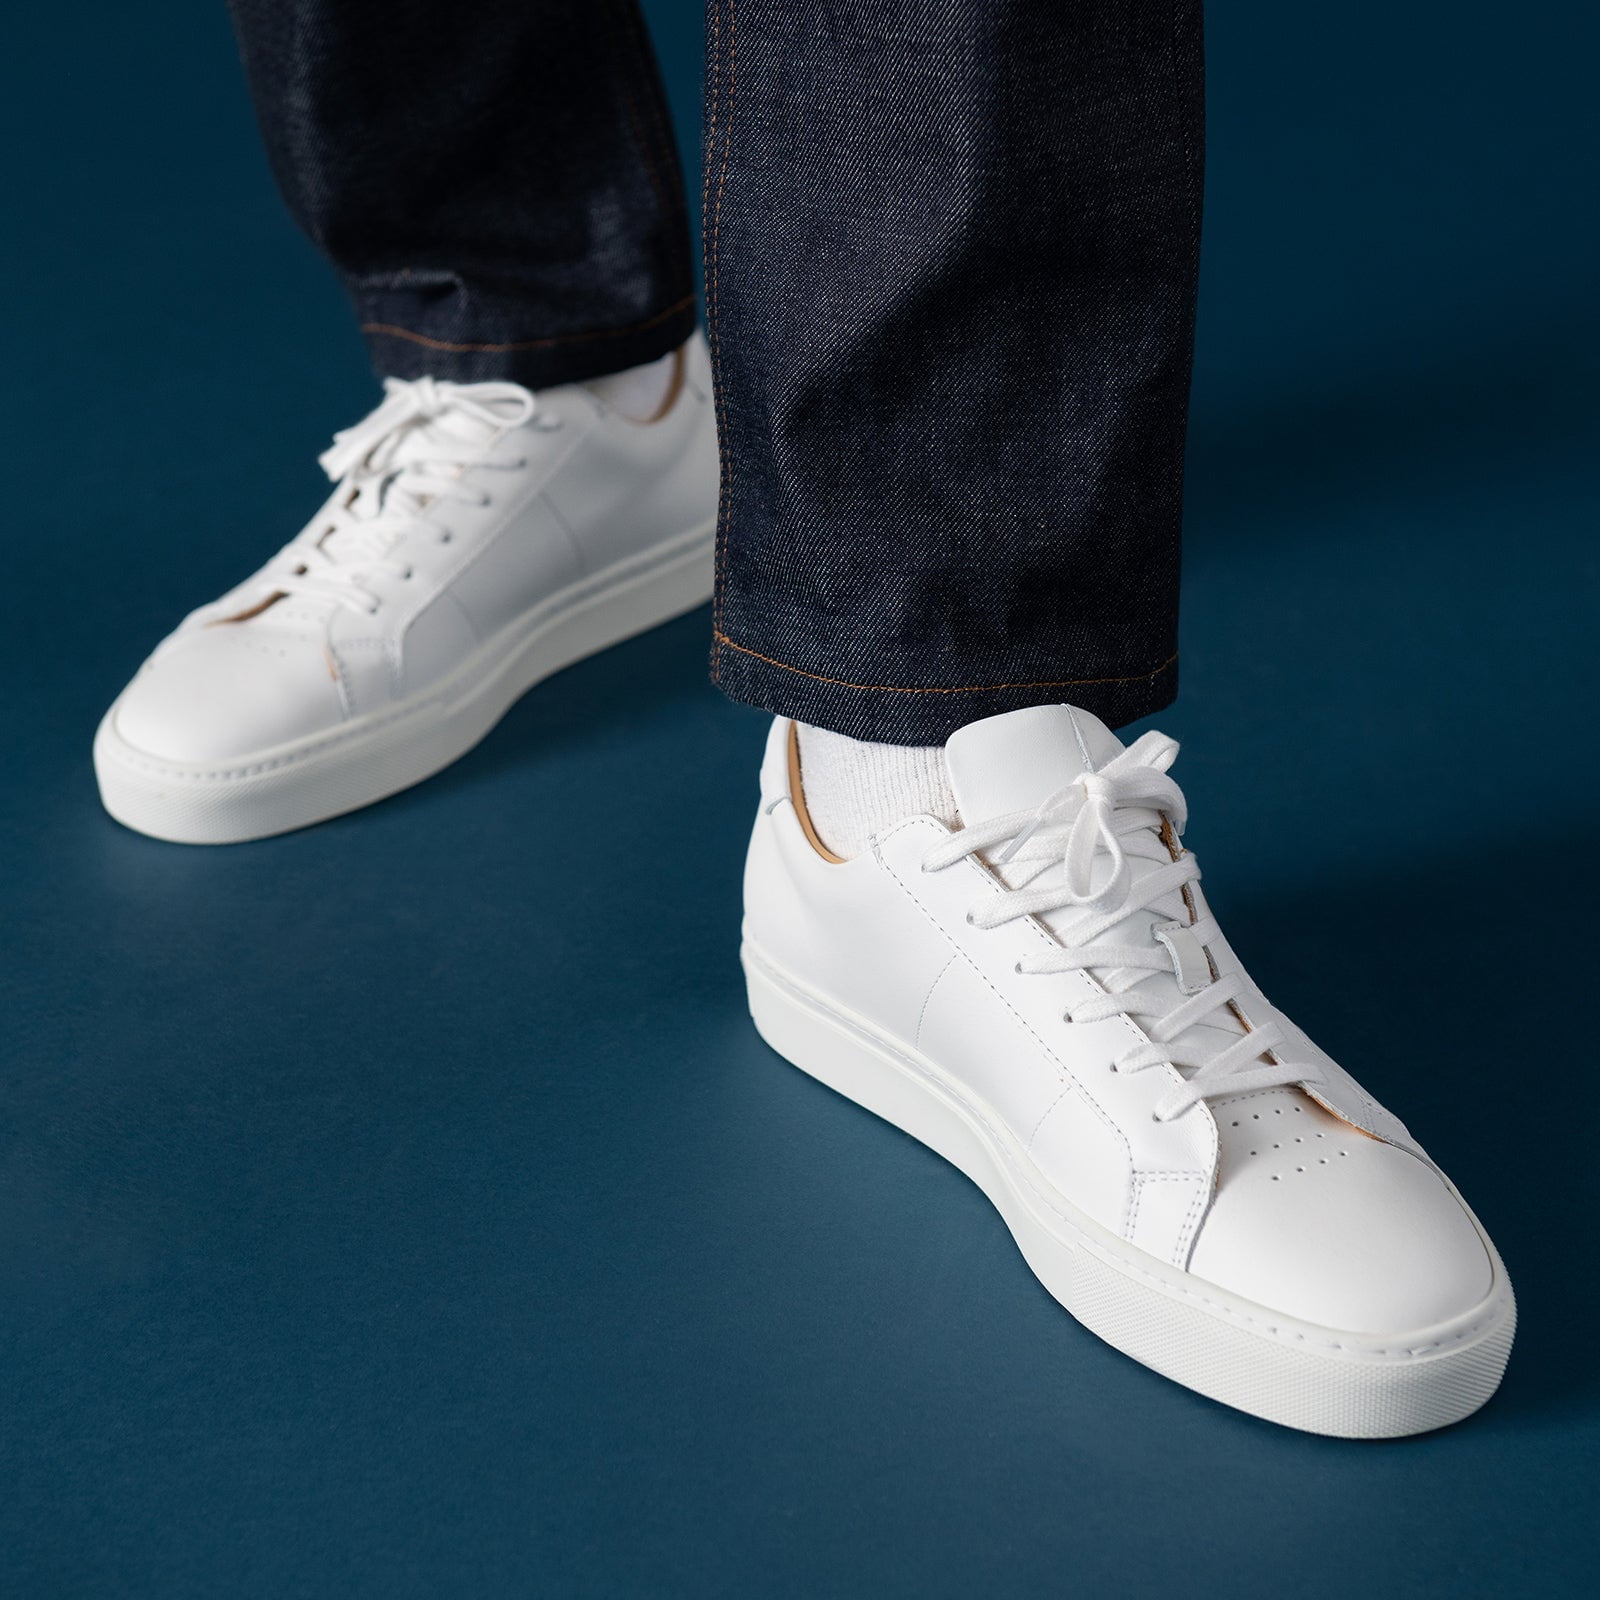 Greats - The Royale 2.0 - Cuoio - Men's Shoe – GREATS